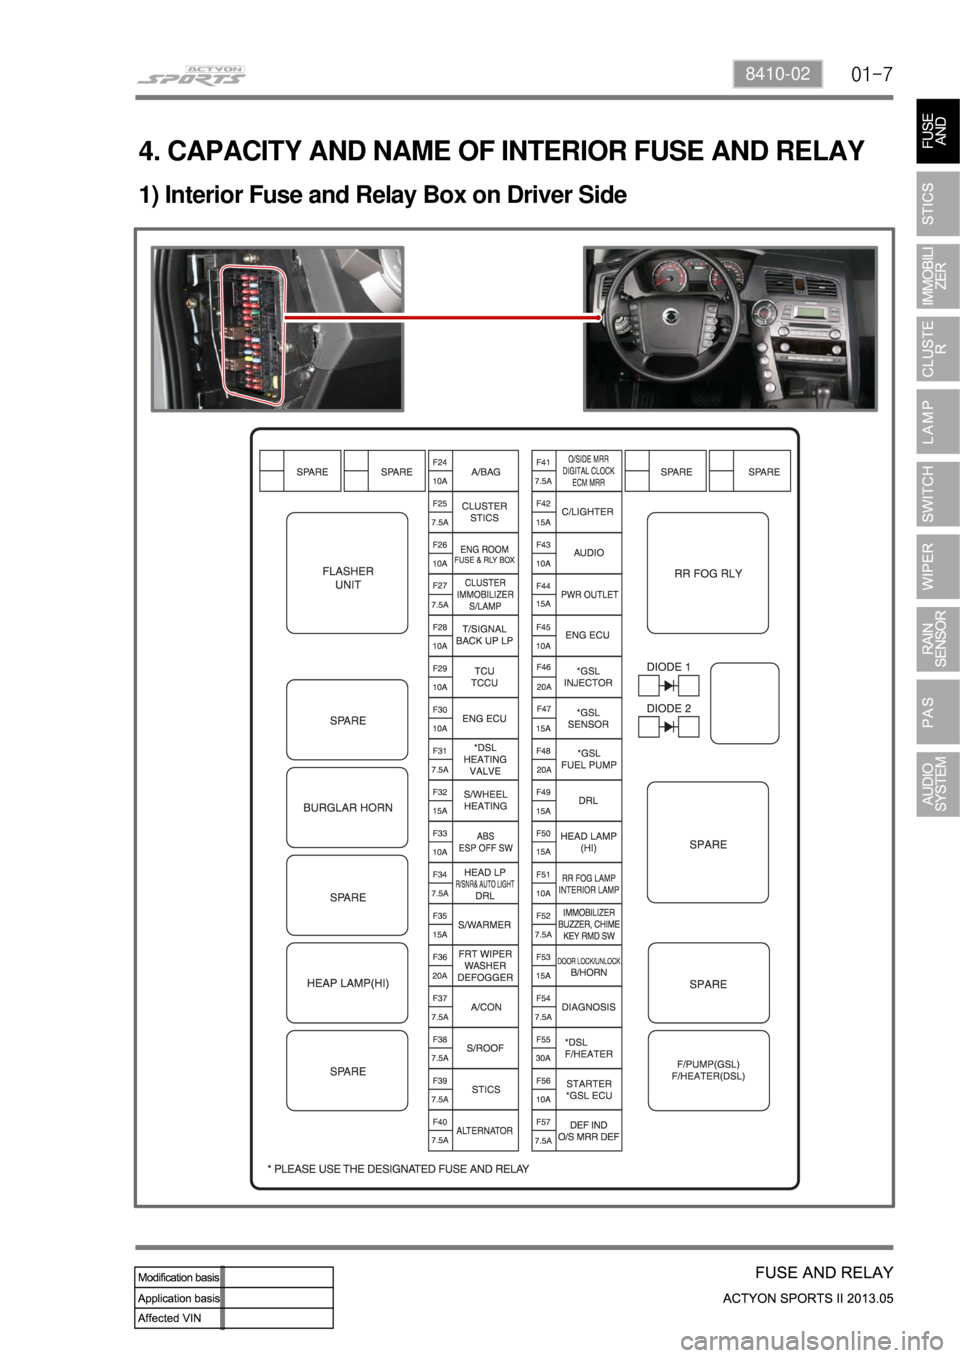 SSANGYONG NEW ACTYON SPORTS 2013  Service Manual 01-78410-02
4. CAPACITY AND NAME OF INTERIOR FUSE AND RELAY
1) Interior Fuse and Relay Box on Driver Side  